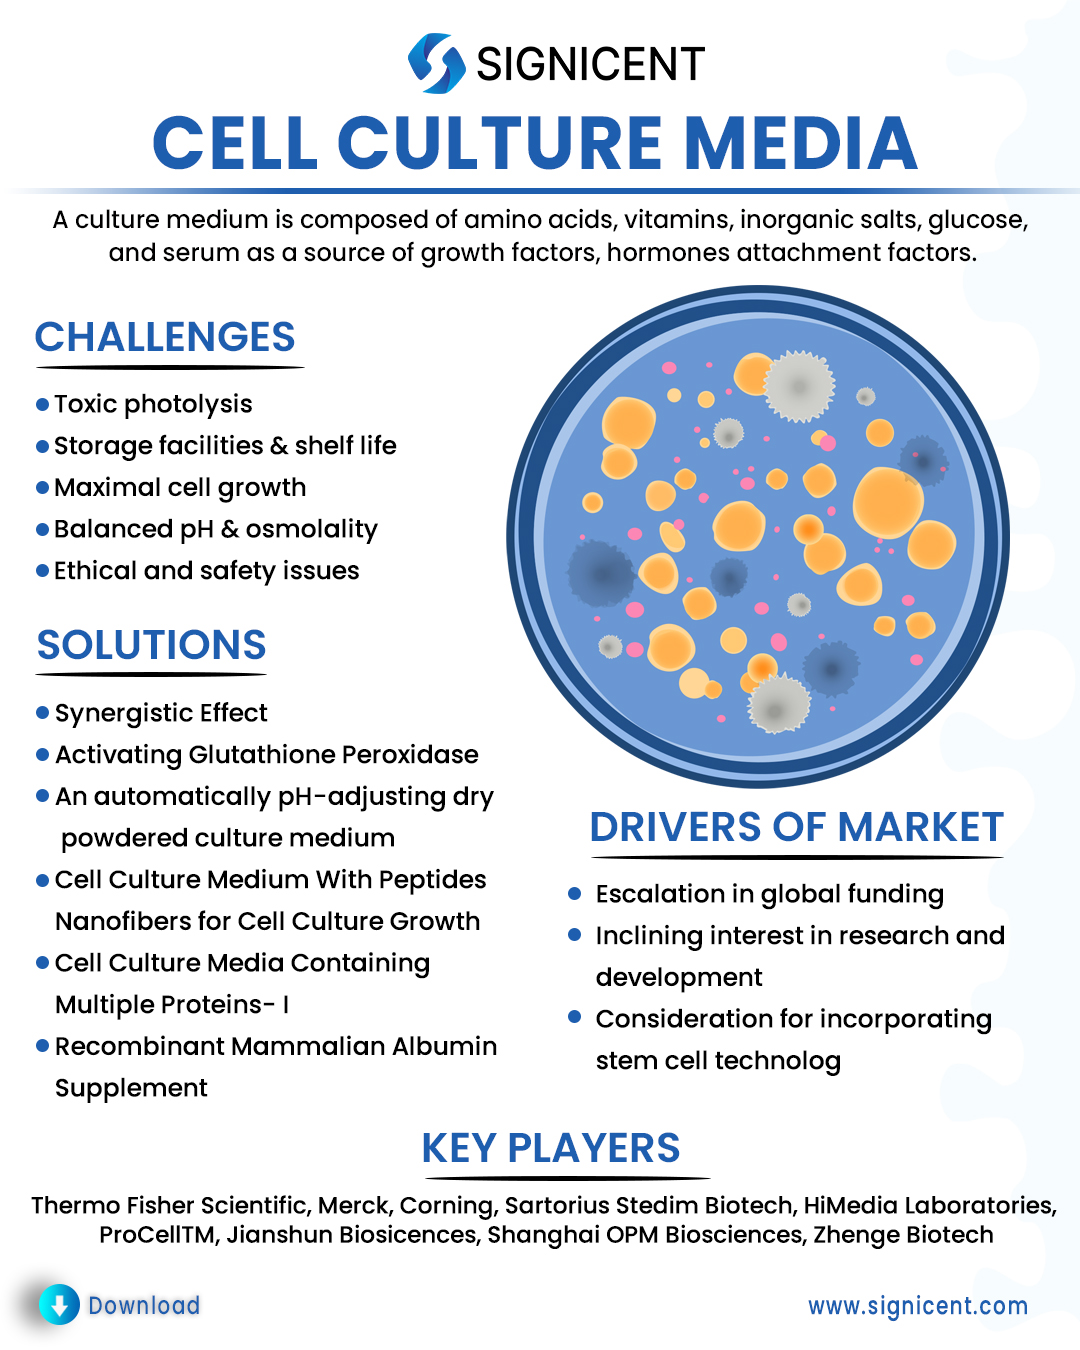 Cell Culture Media Report: How Innovative Solutions are impacting Market &  Industry? - Signicent LLP